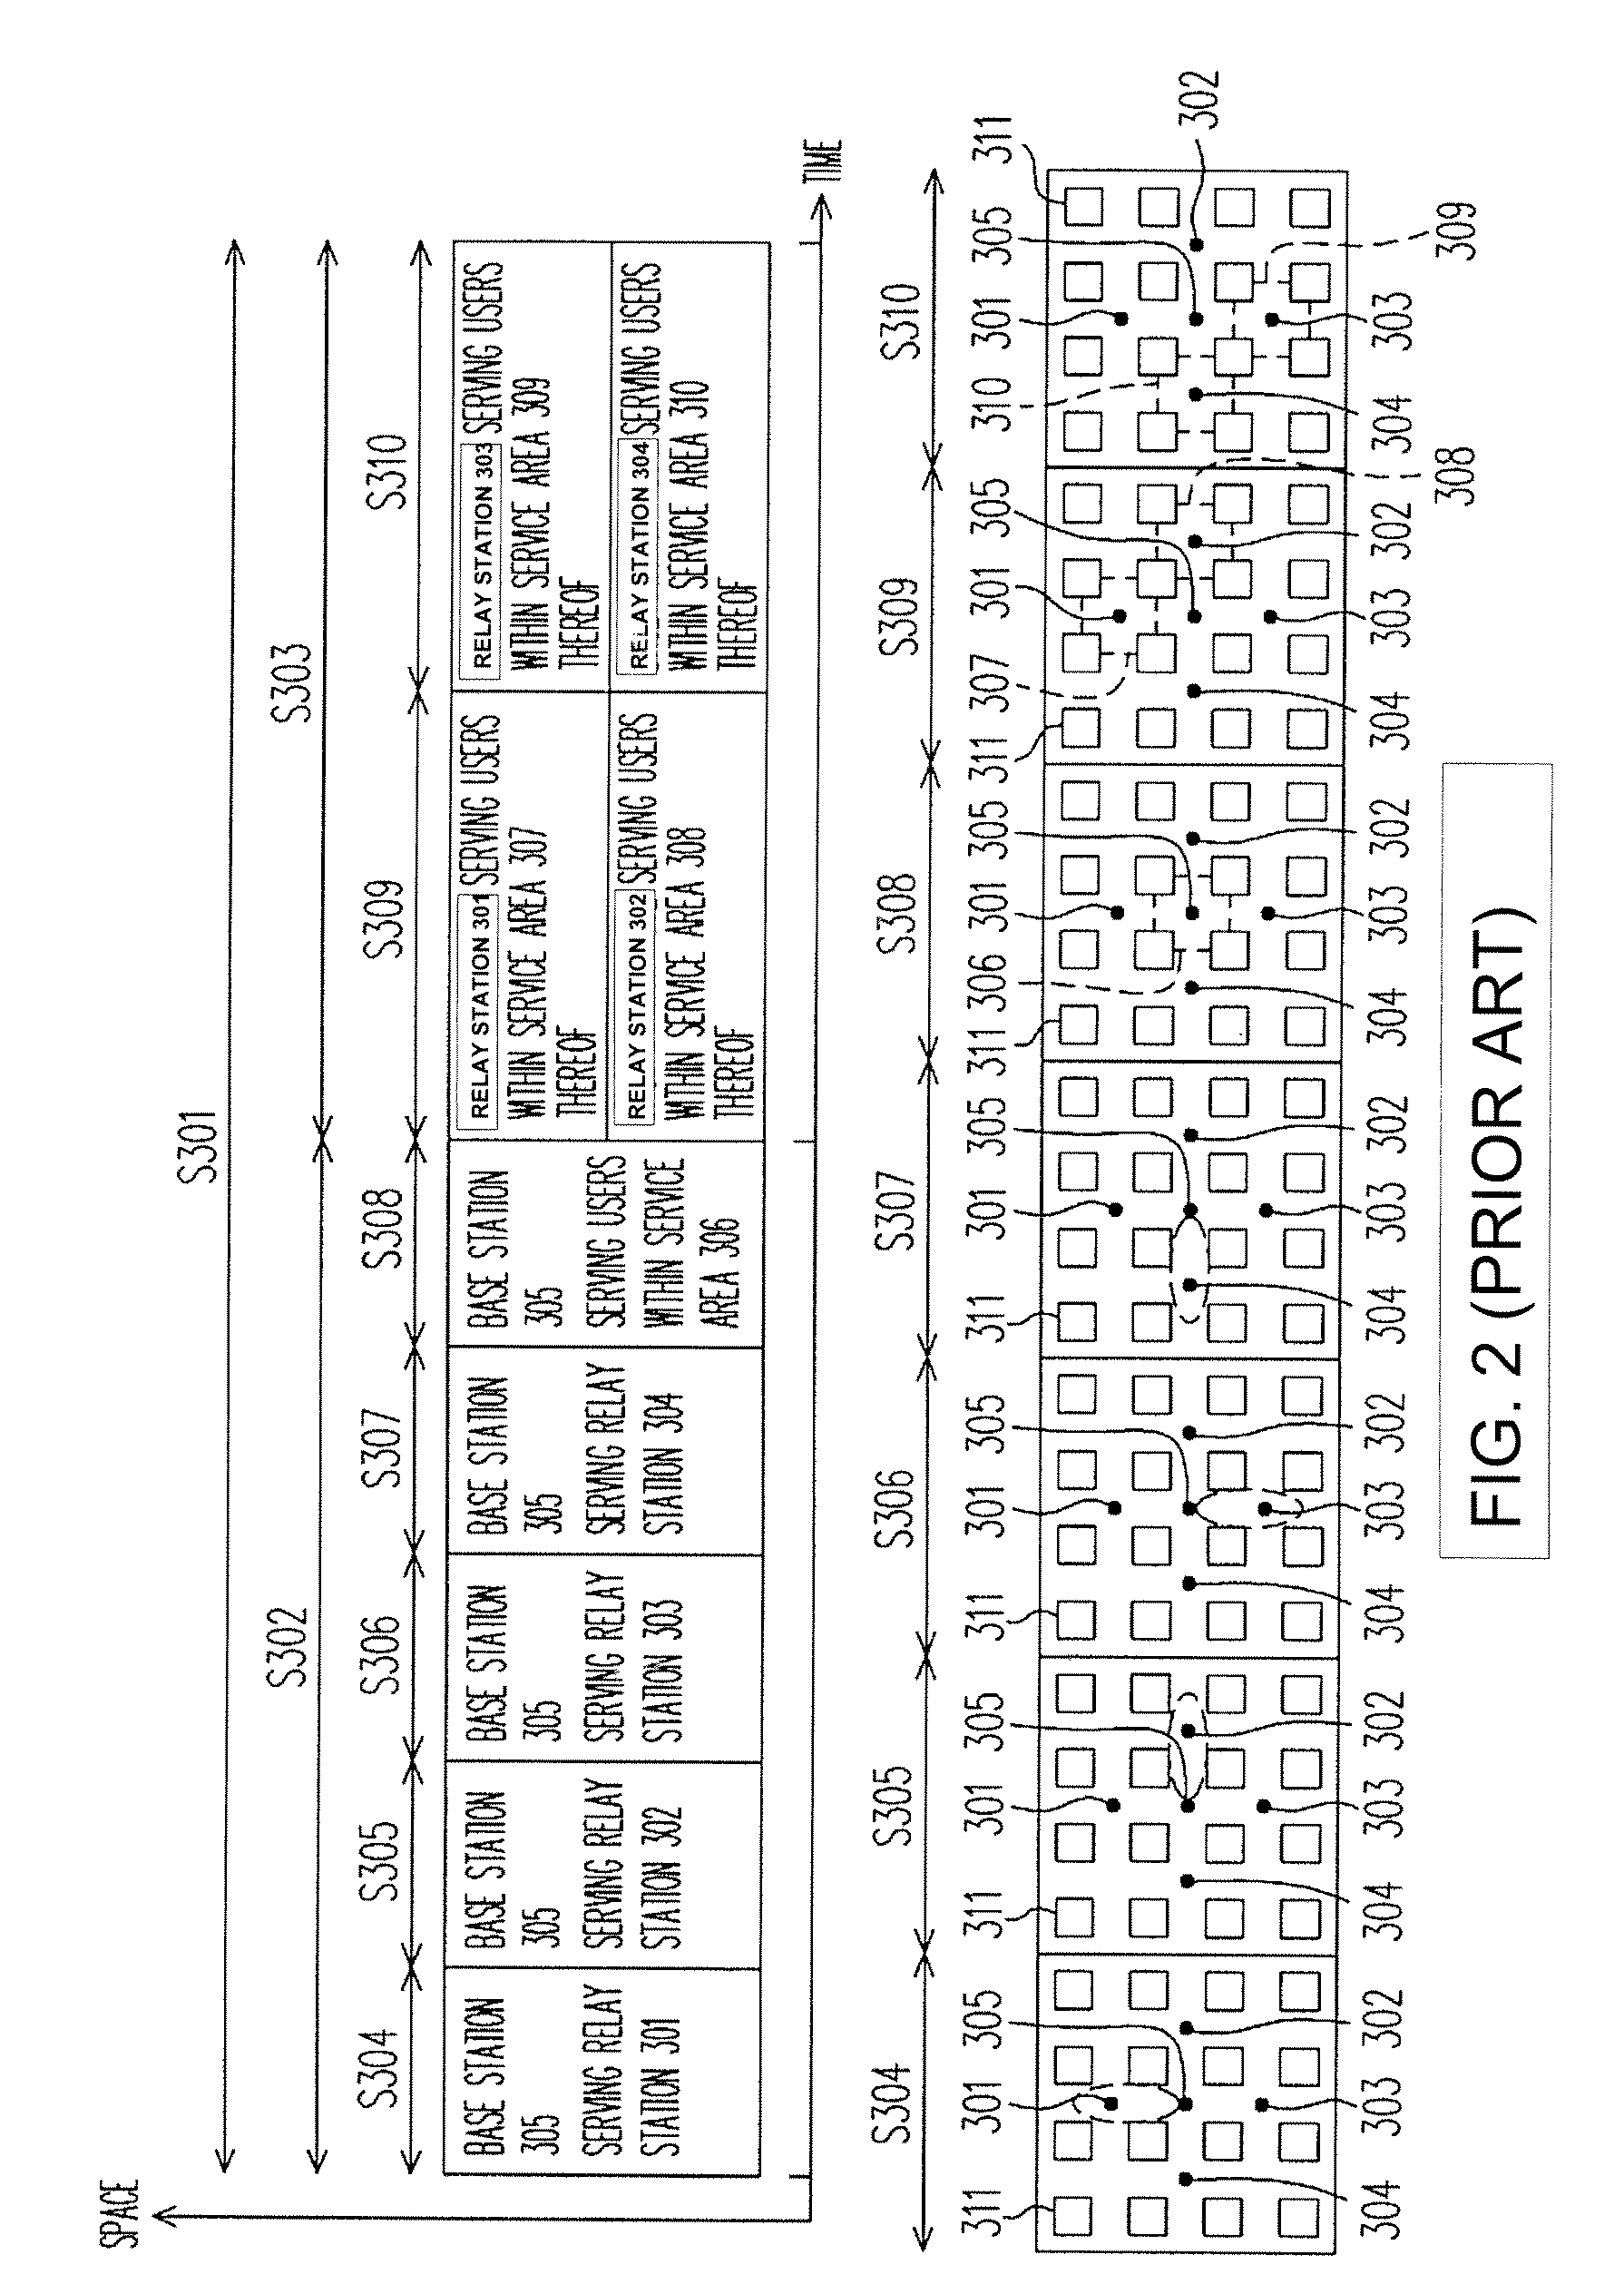 Scheduling methods and systems for multi-hop relay in wireless communications